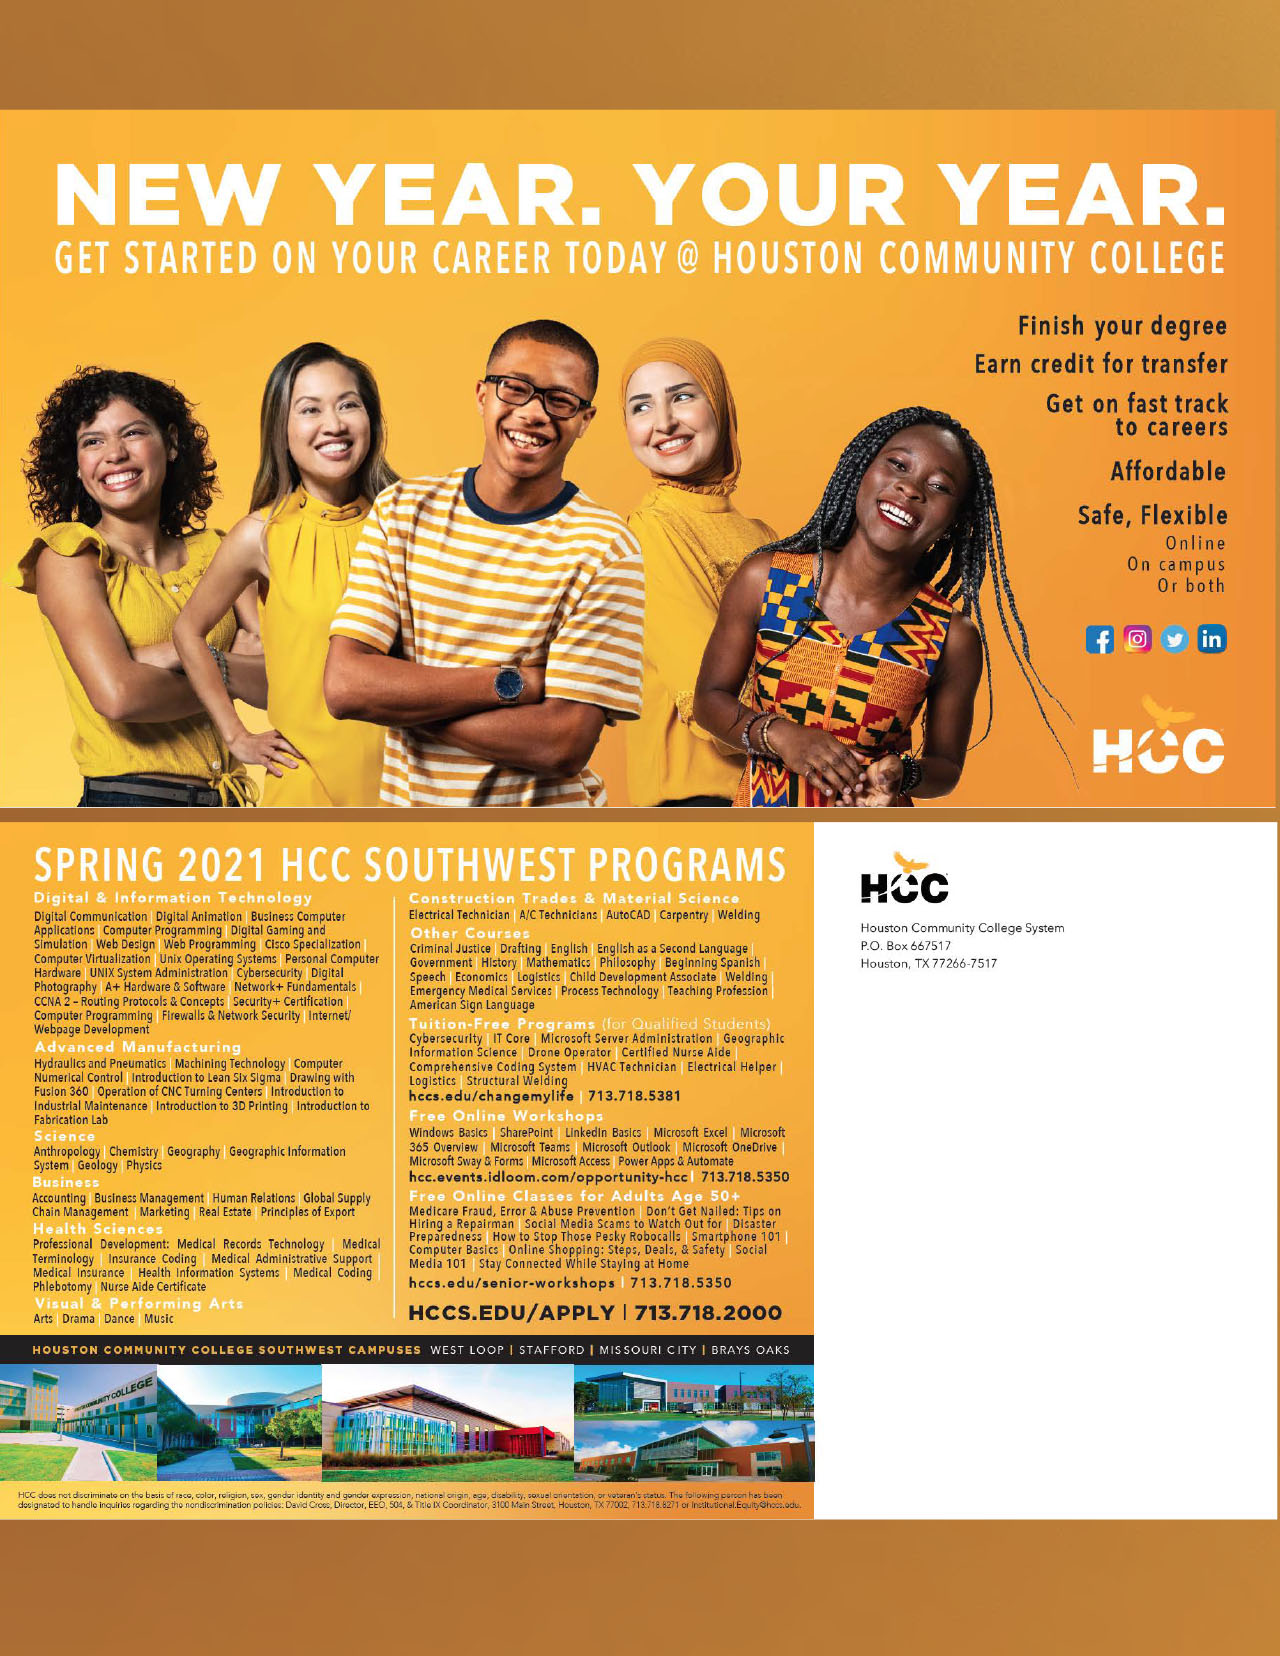 HCC Spring 2021 programs and International Management District